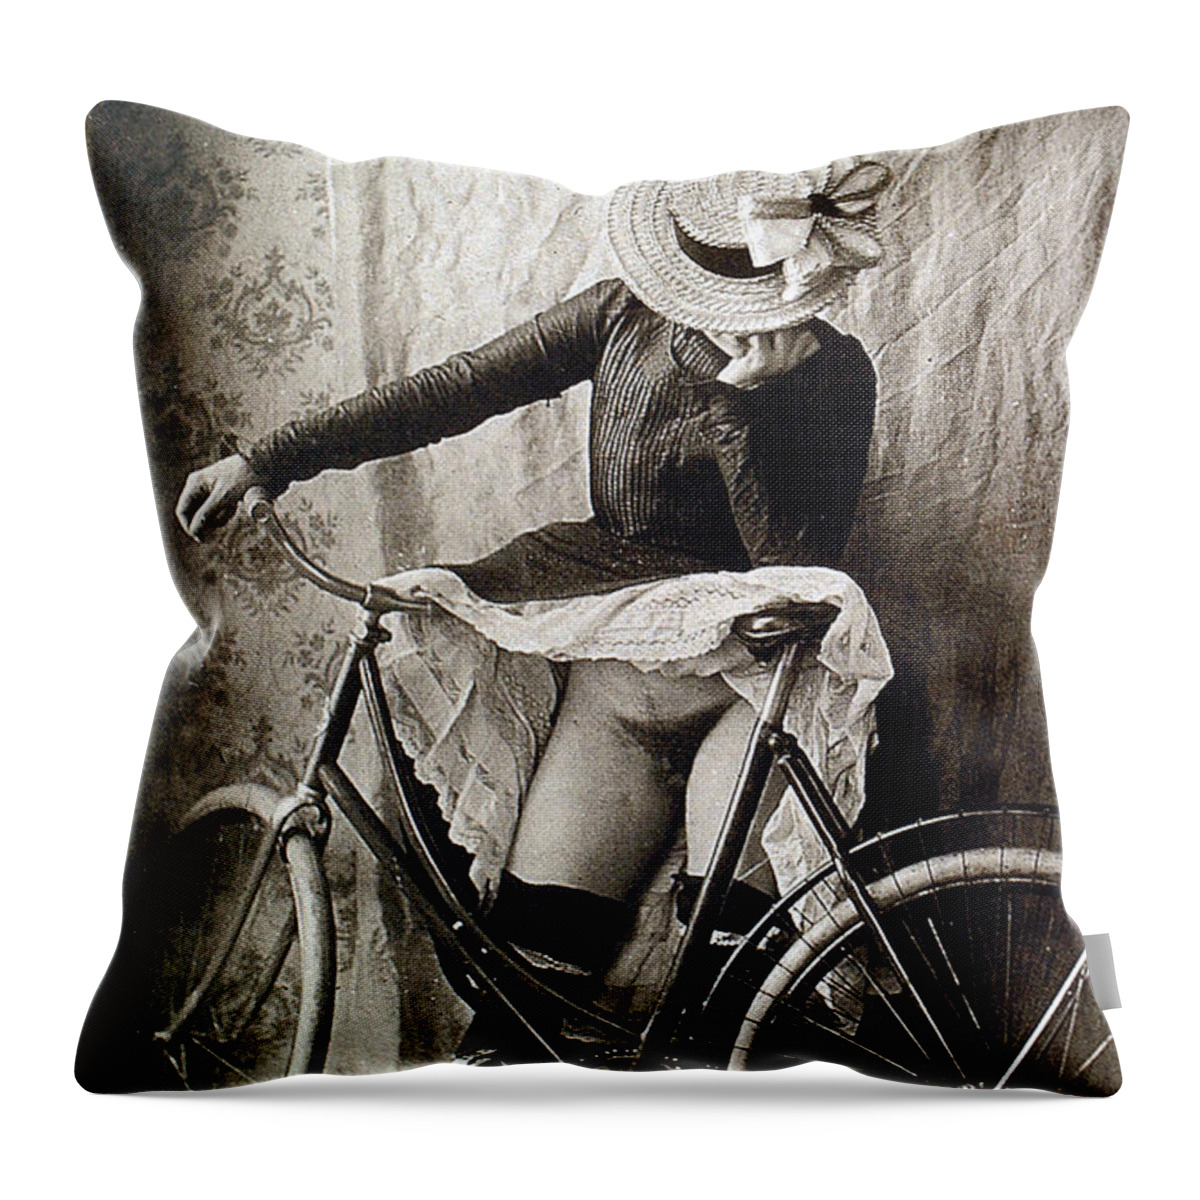 Skirt Up Bicycle Rider Throw Pillow featuring the photograph Skirt UP Bicycle Rider by Unknown